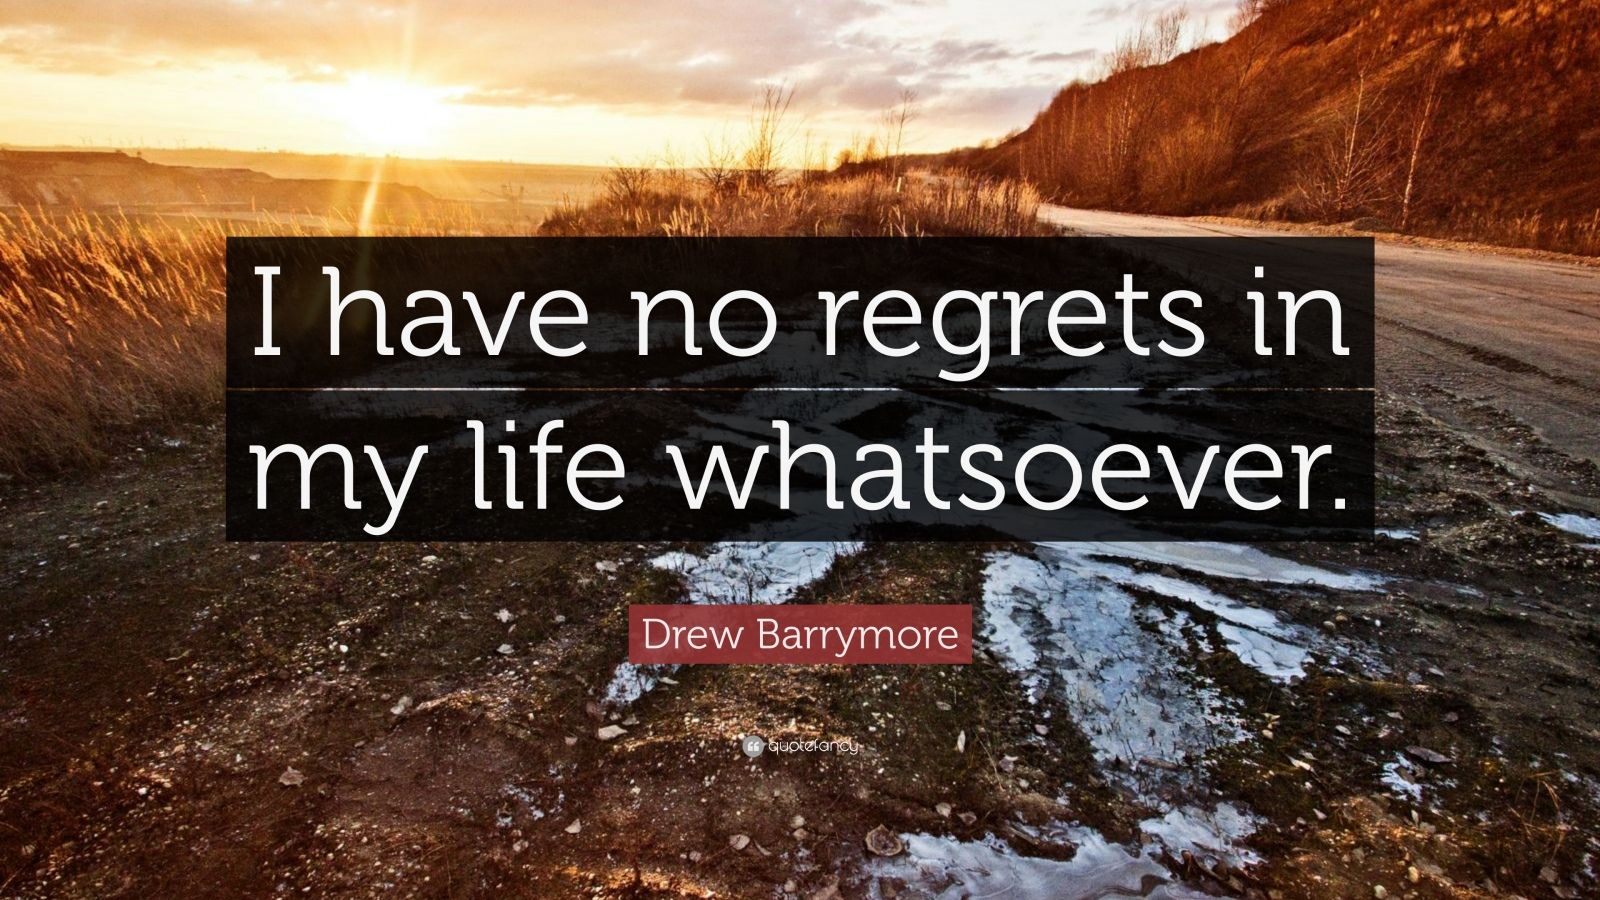 Drew Barrymore Quote: “I have no regrets in my life whatsoever.” (7 ...